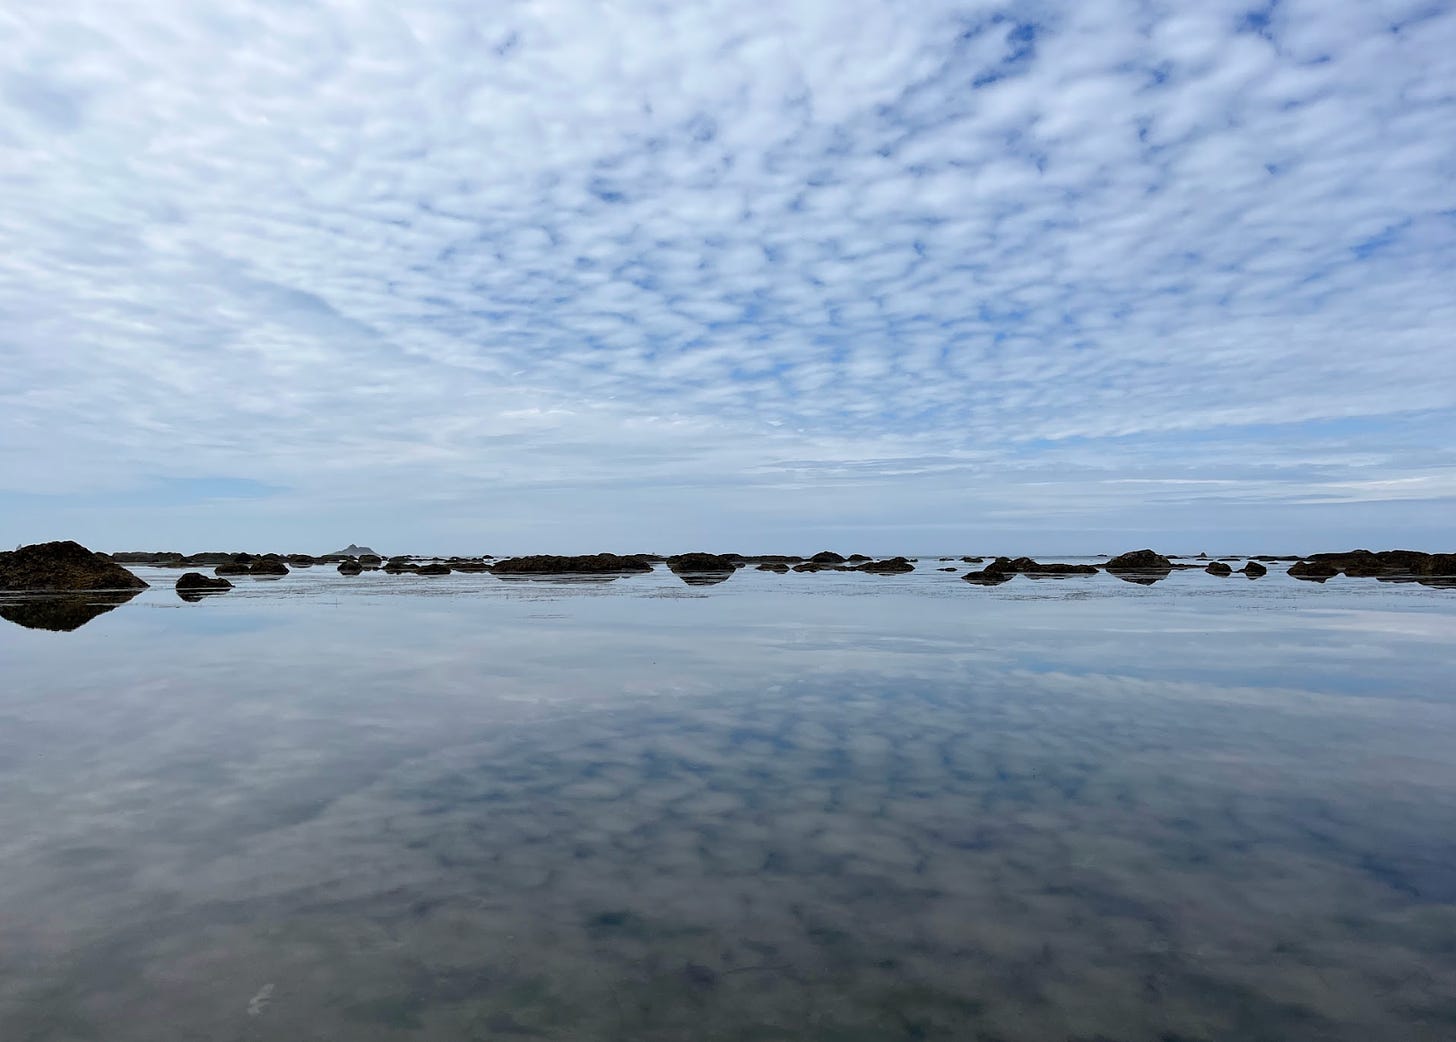 Party cloudy sky mirrored in tide pool.